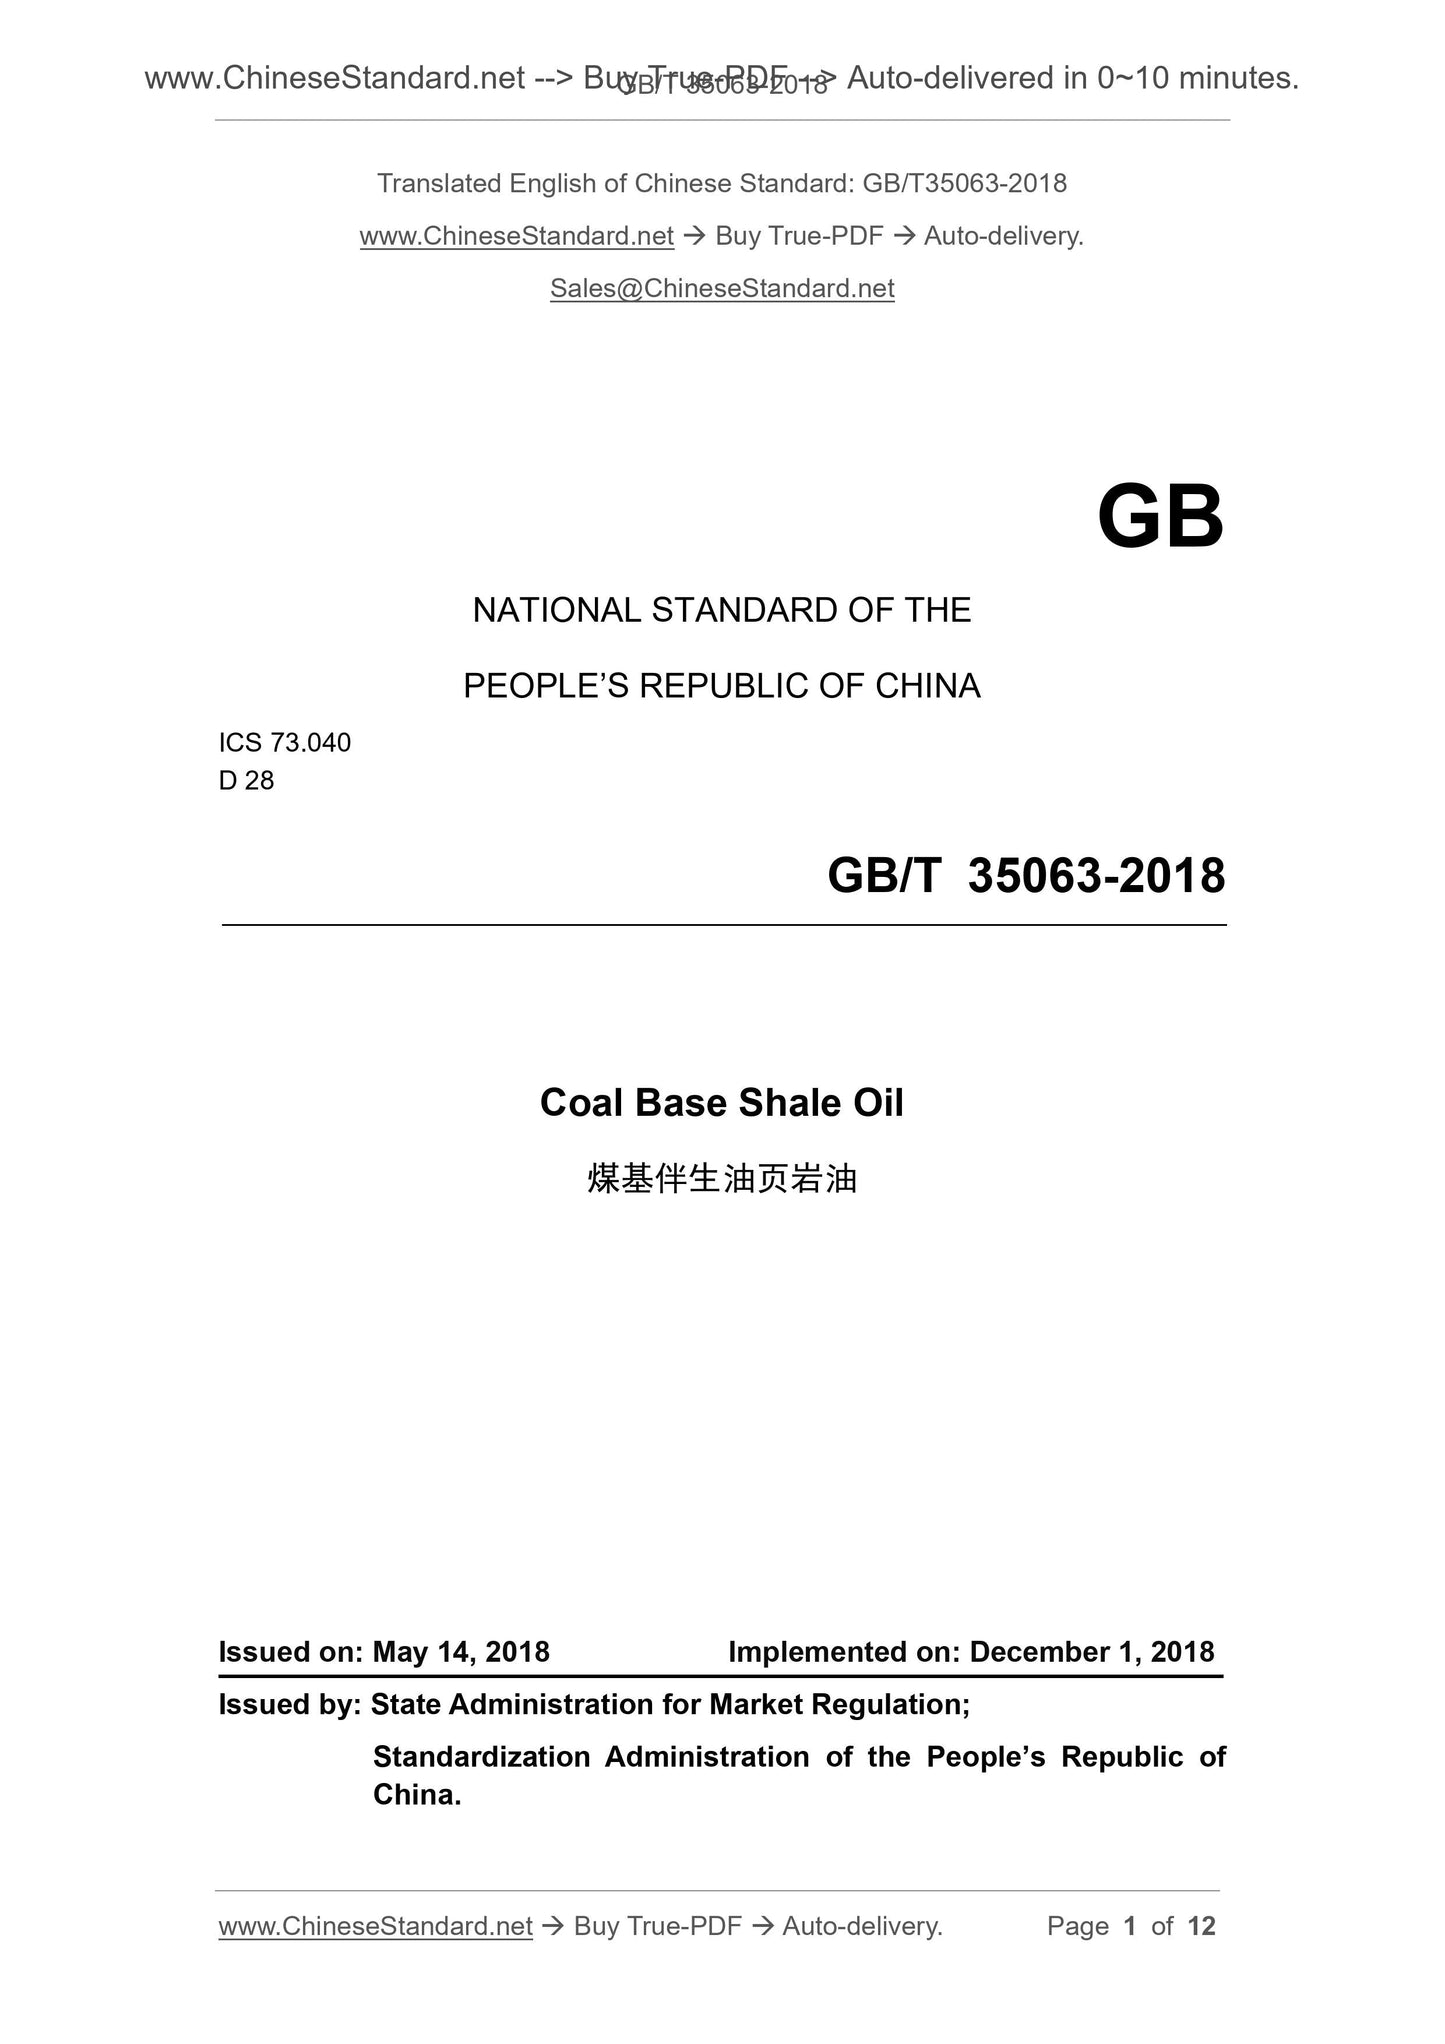 GB/T 35063-2018 Page 1